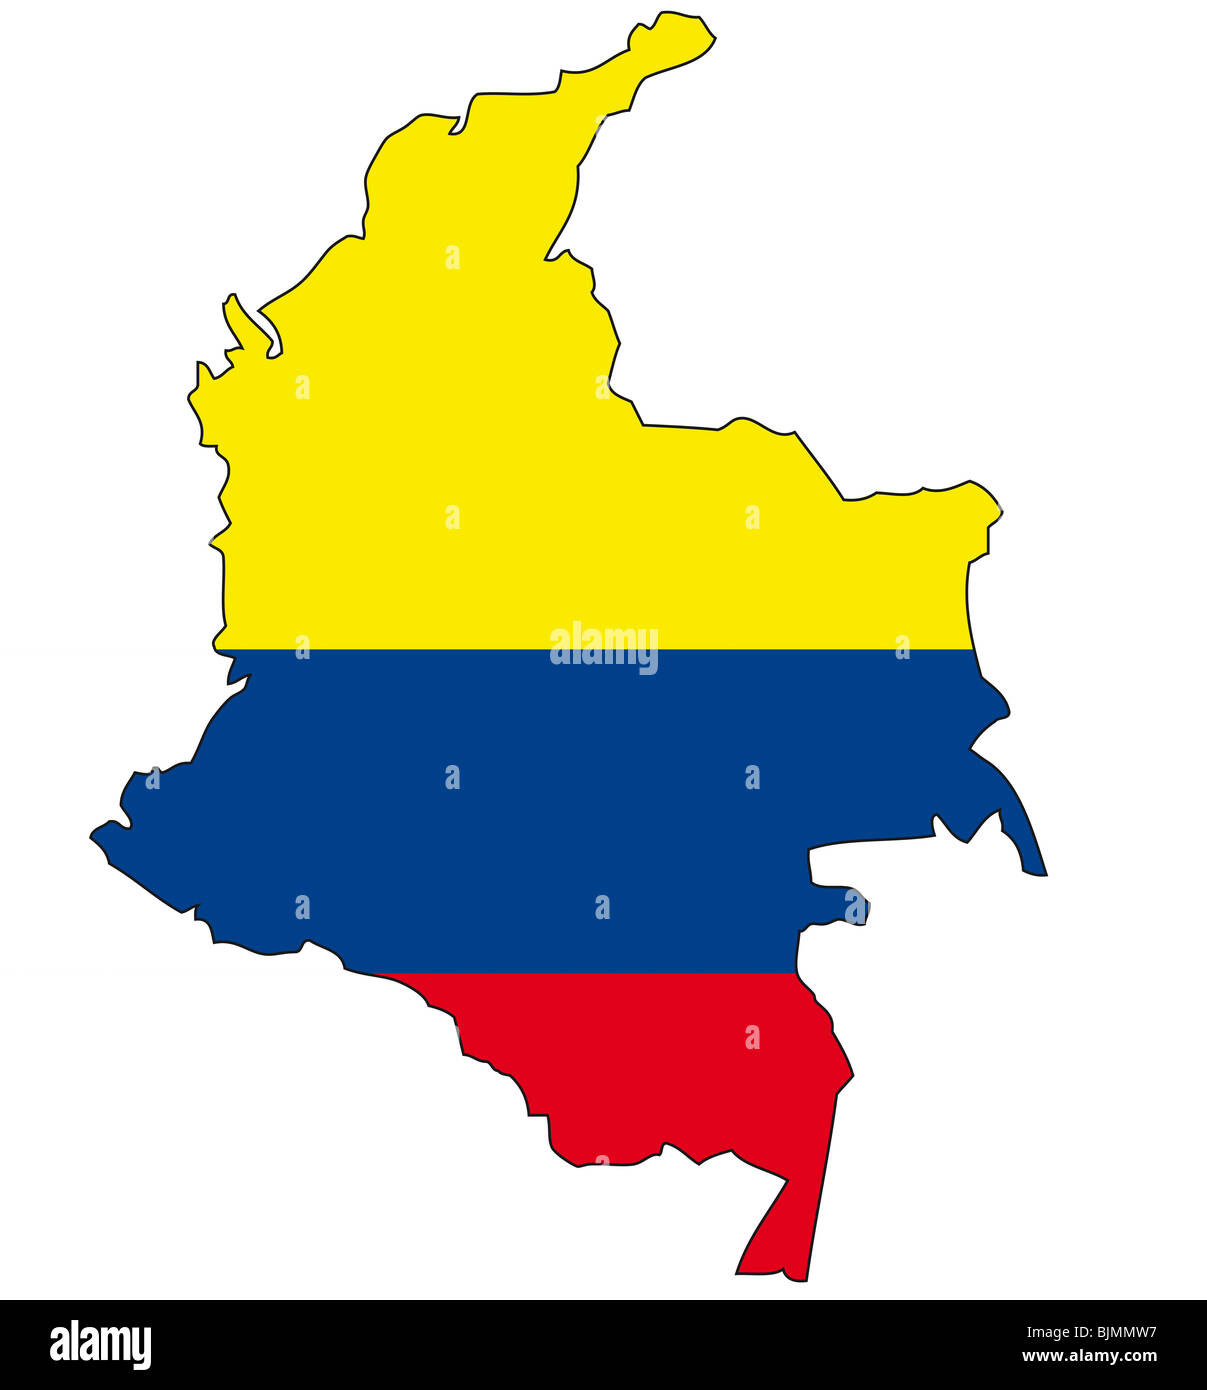 Colombia, flag, outline Stock Photo